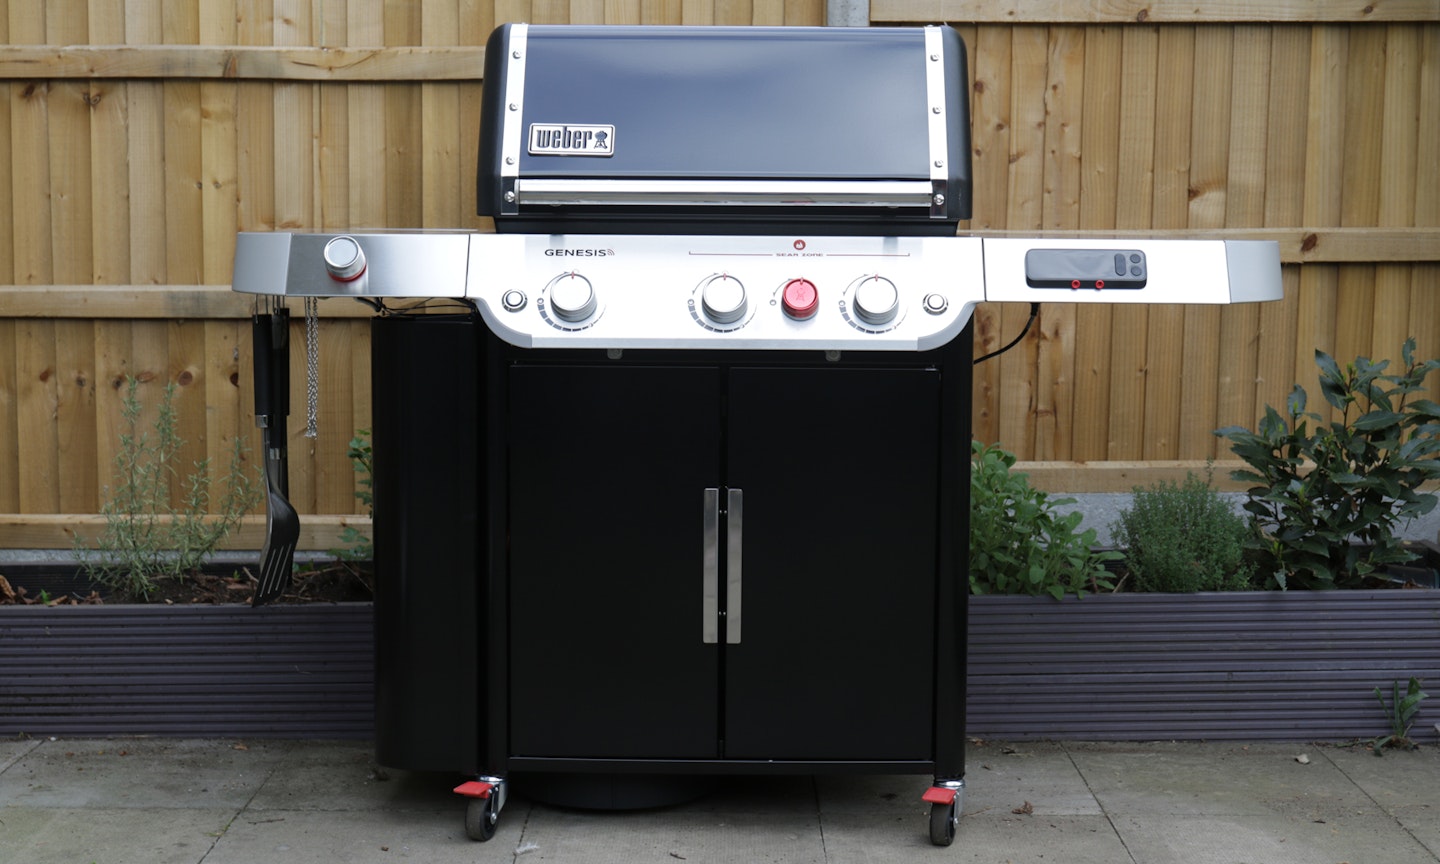 Weber Genesis EPX-335 Smart Gas Grill Review